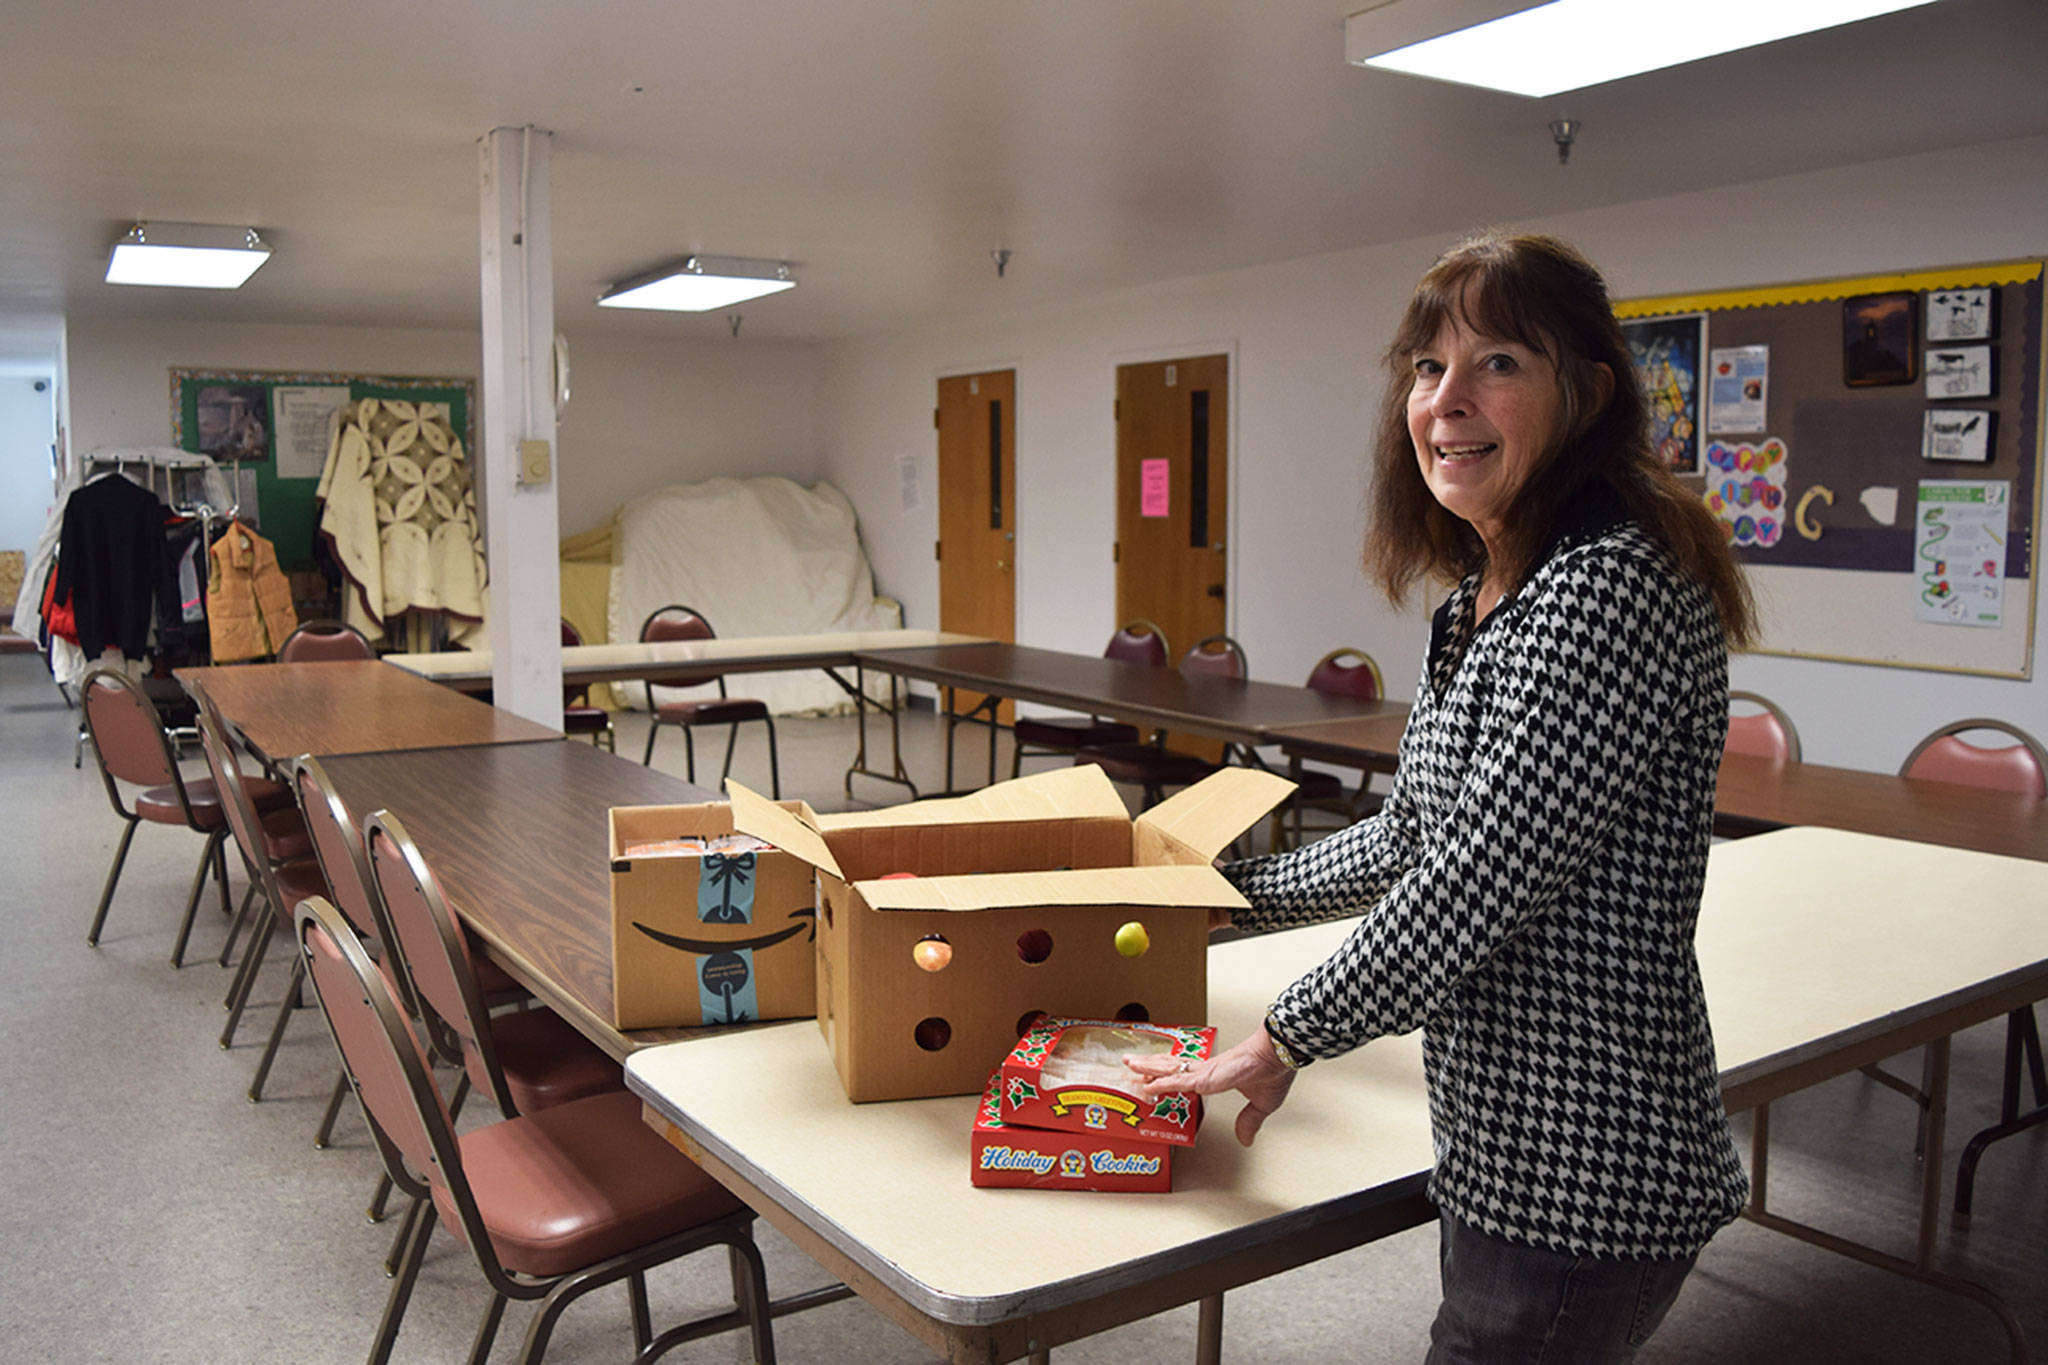 Jean Pratschner, volunteer coordinator for the Sequim Community Warming Center, unpacks donated snacks and goodie bags to give out at the center. Starting tonight, the center will be open from 9 p.m. to 7 a.m. every night. (Erin Hawkins/Olympic Peninsula News Group)